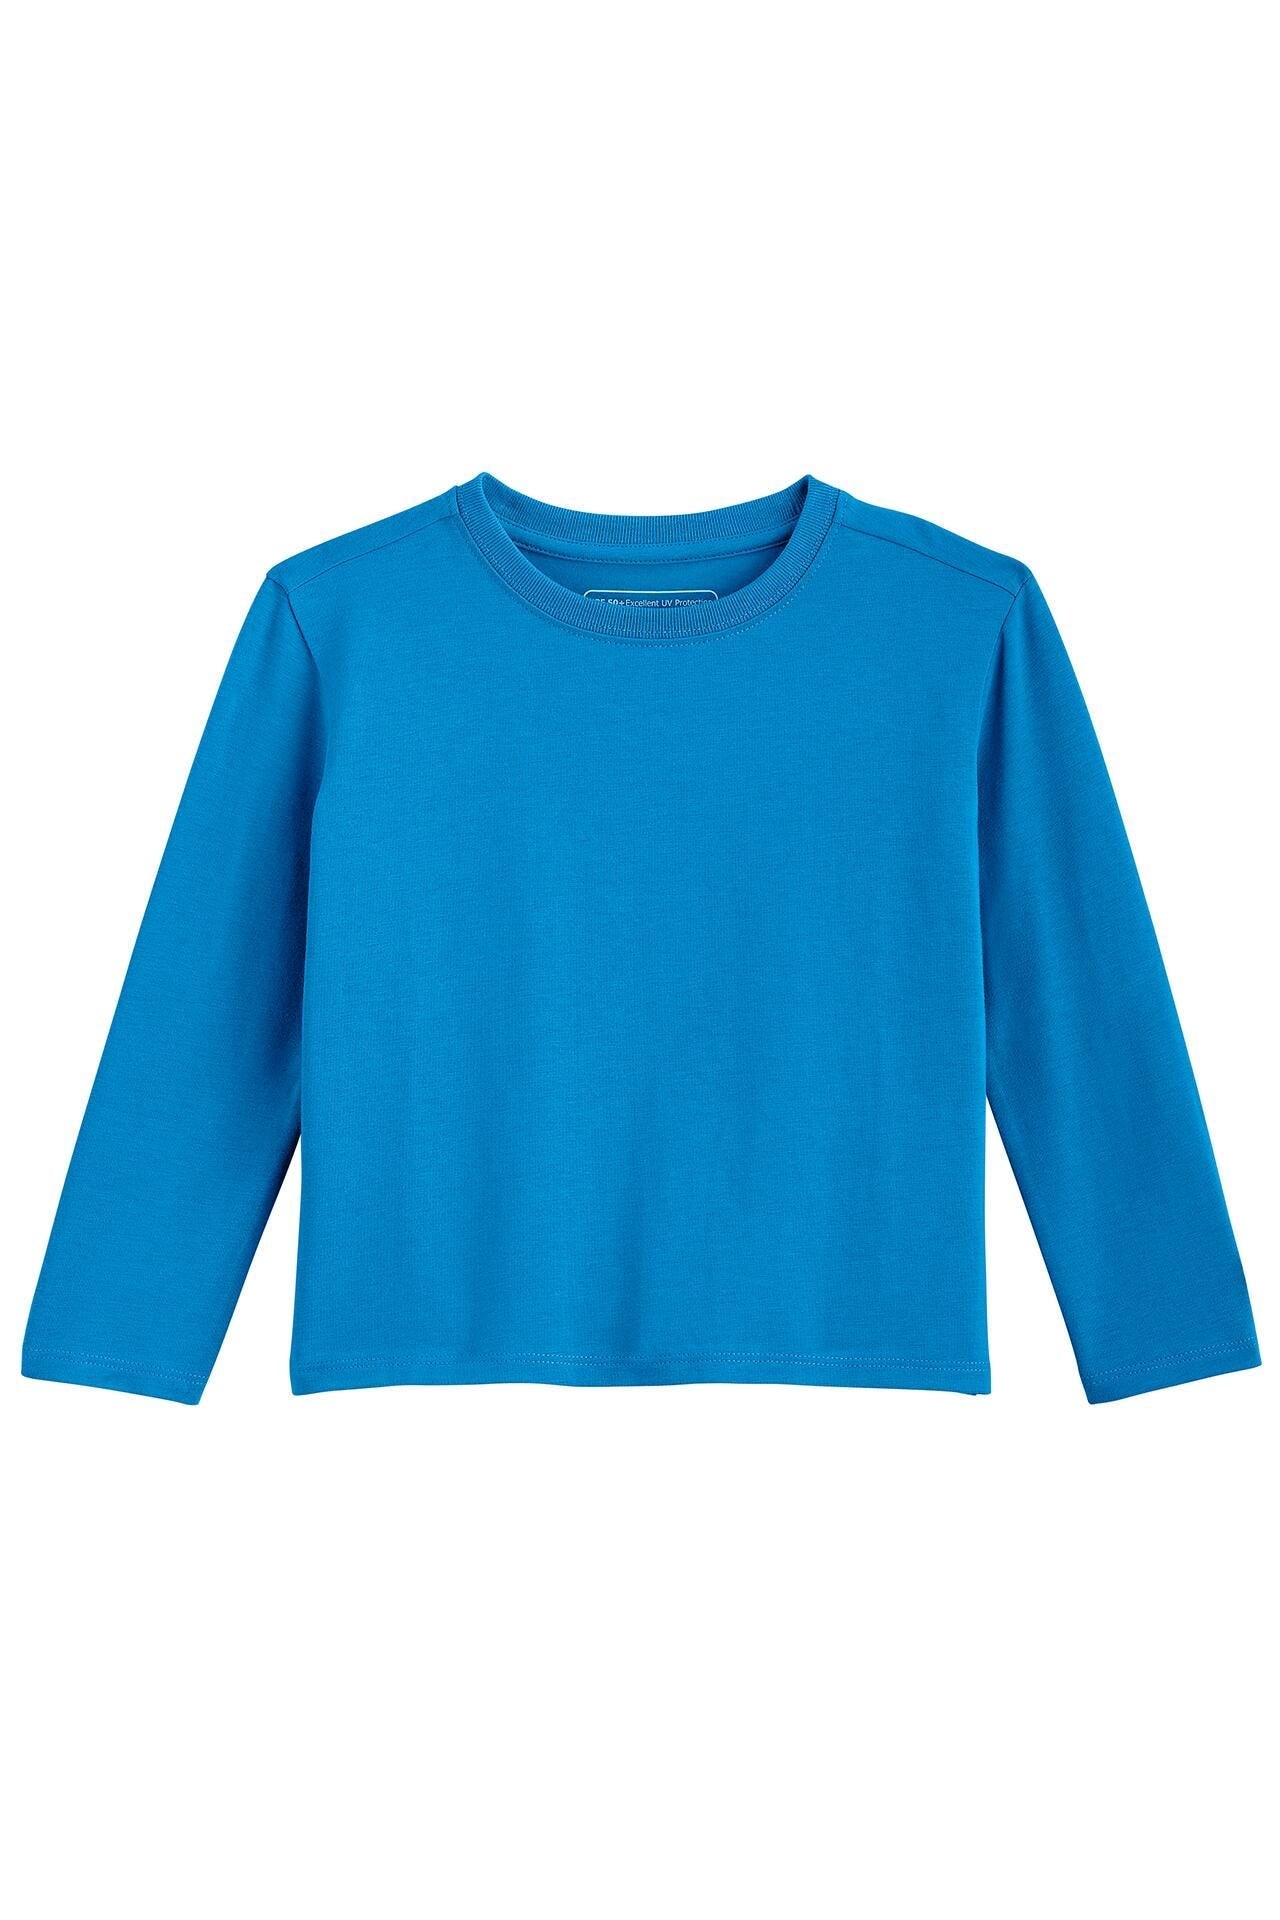 Long Sleeve t-shirt for kids, sun protection UPF+50, UV Protection